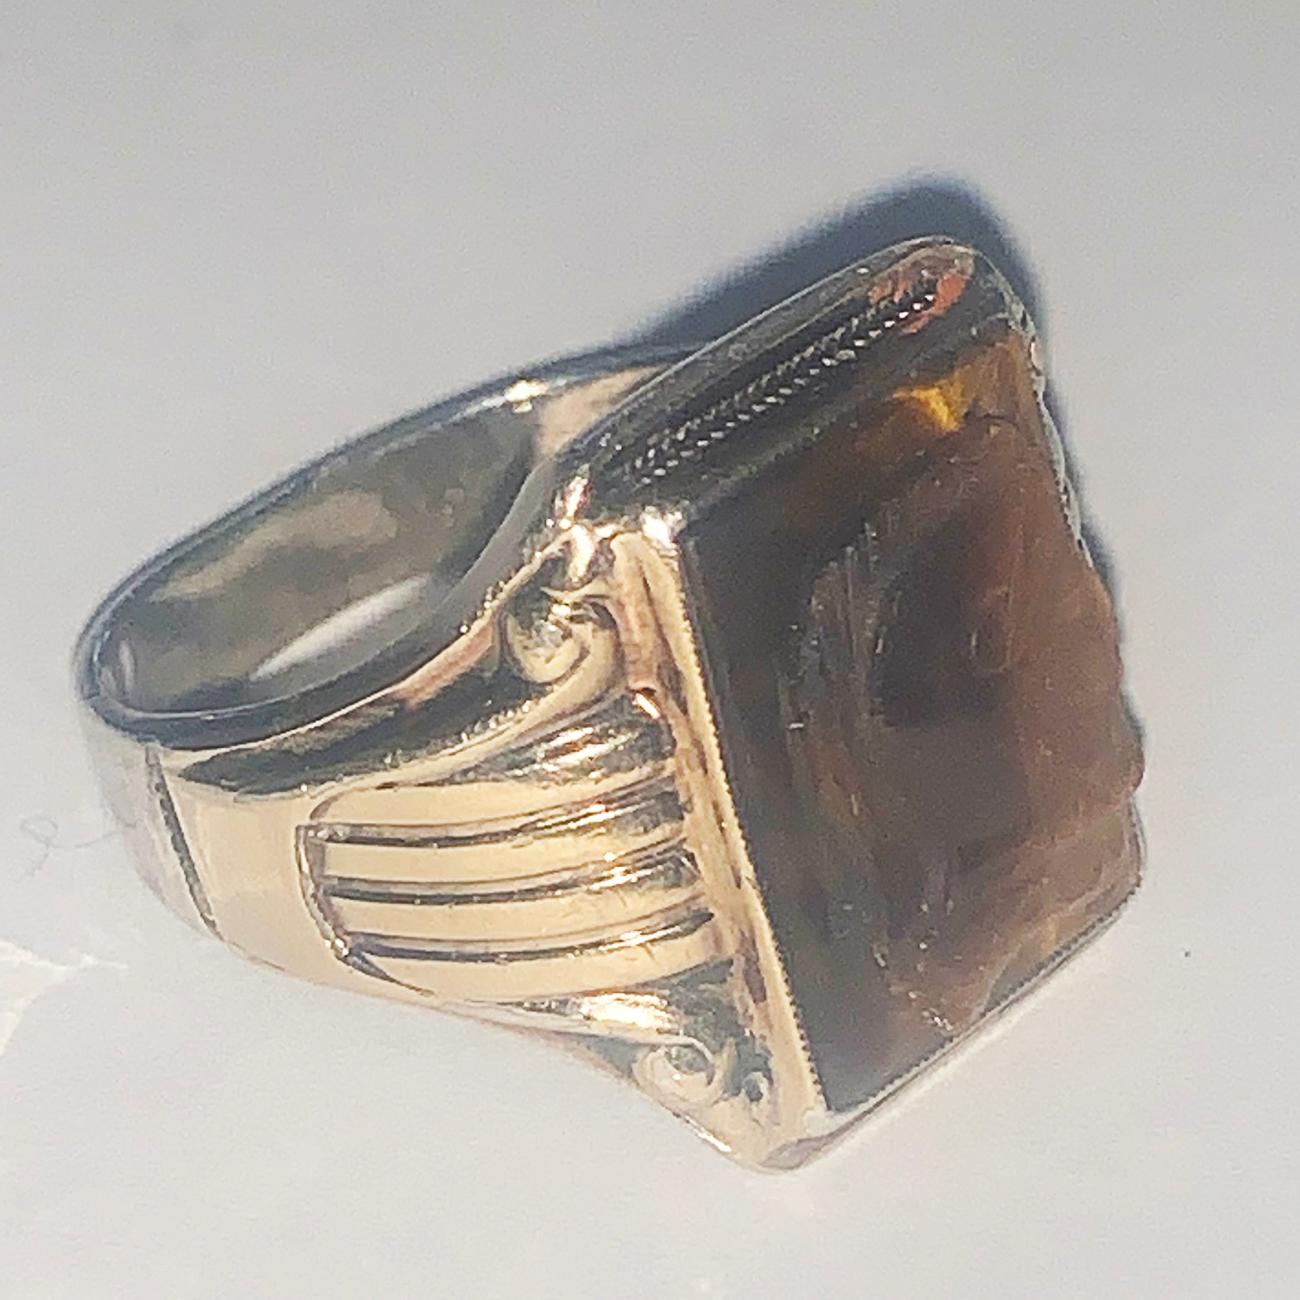 Art Deco Signet Ring Roman Carved Tiger Eye set to 10ct Gold on Sterling Silver rear. Fine detail of a Roman Centurion to the Tiger Eye gem stone, and Hallmarked to the Rear “STERLING” over “10K GOLD TOP” indicating USA origin. Excellent condition